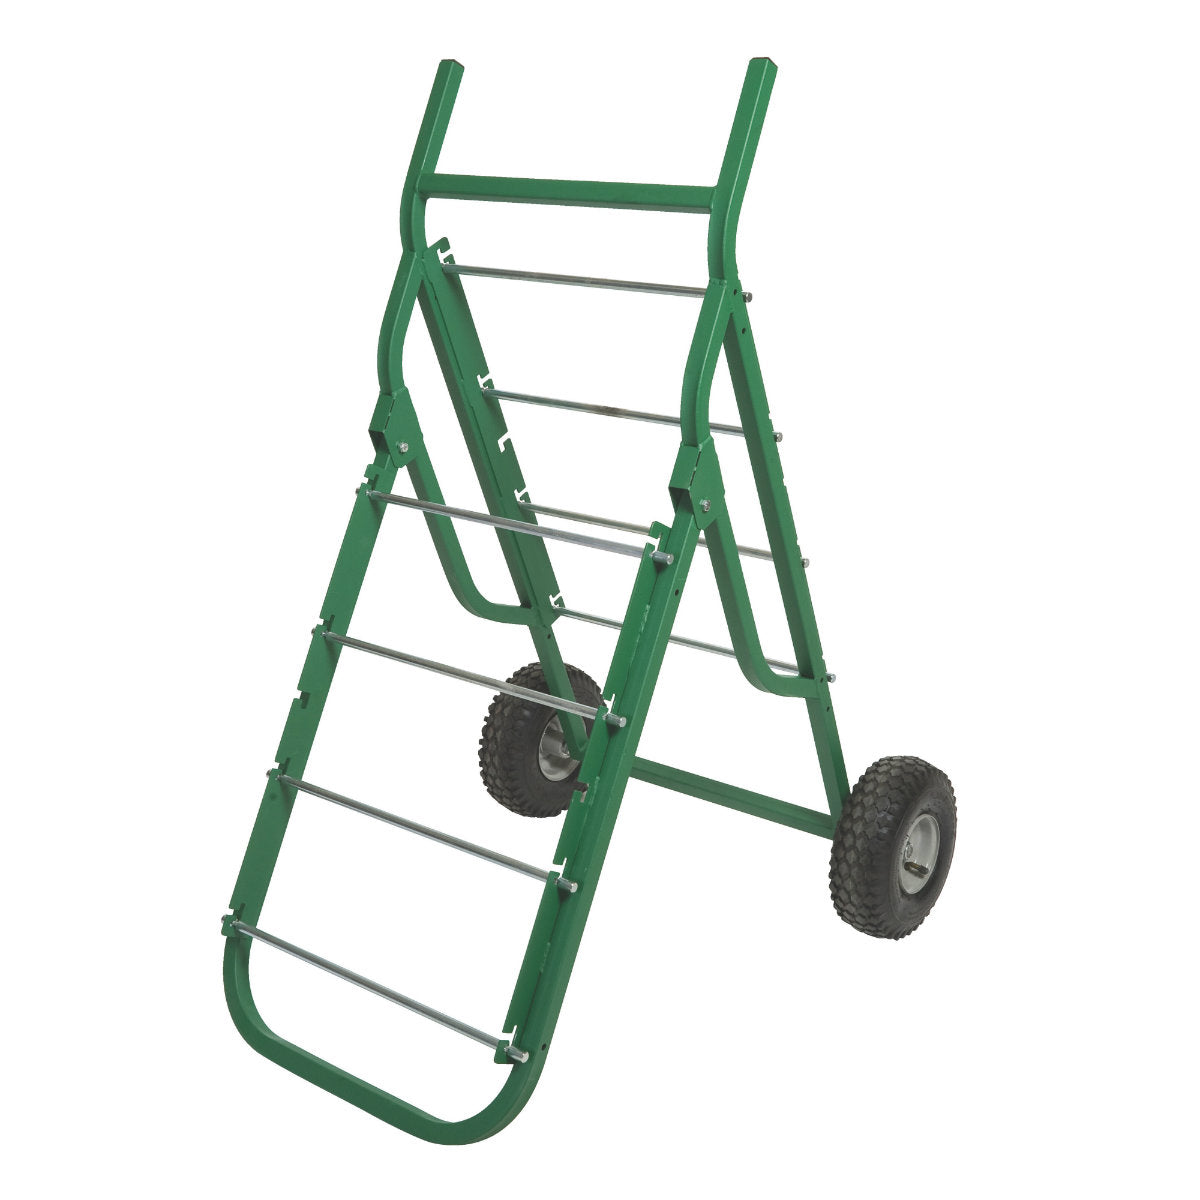 Greenlee 9510 Deluxe A-Frame Mobile Caddy